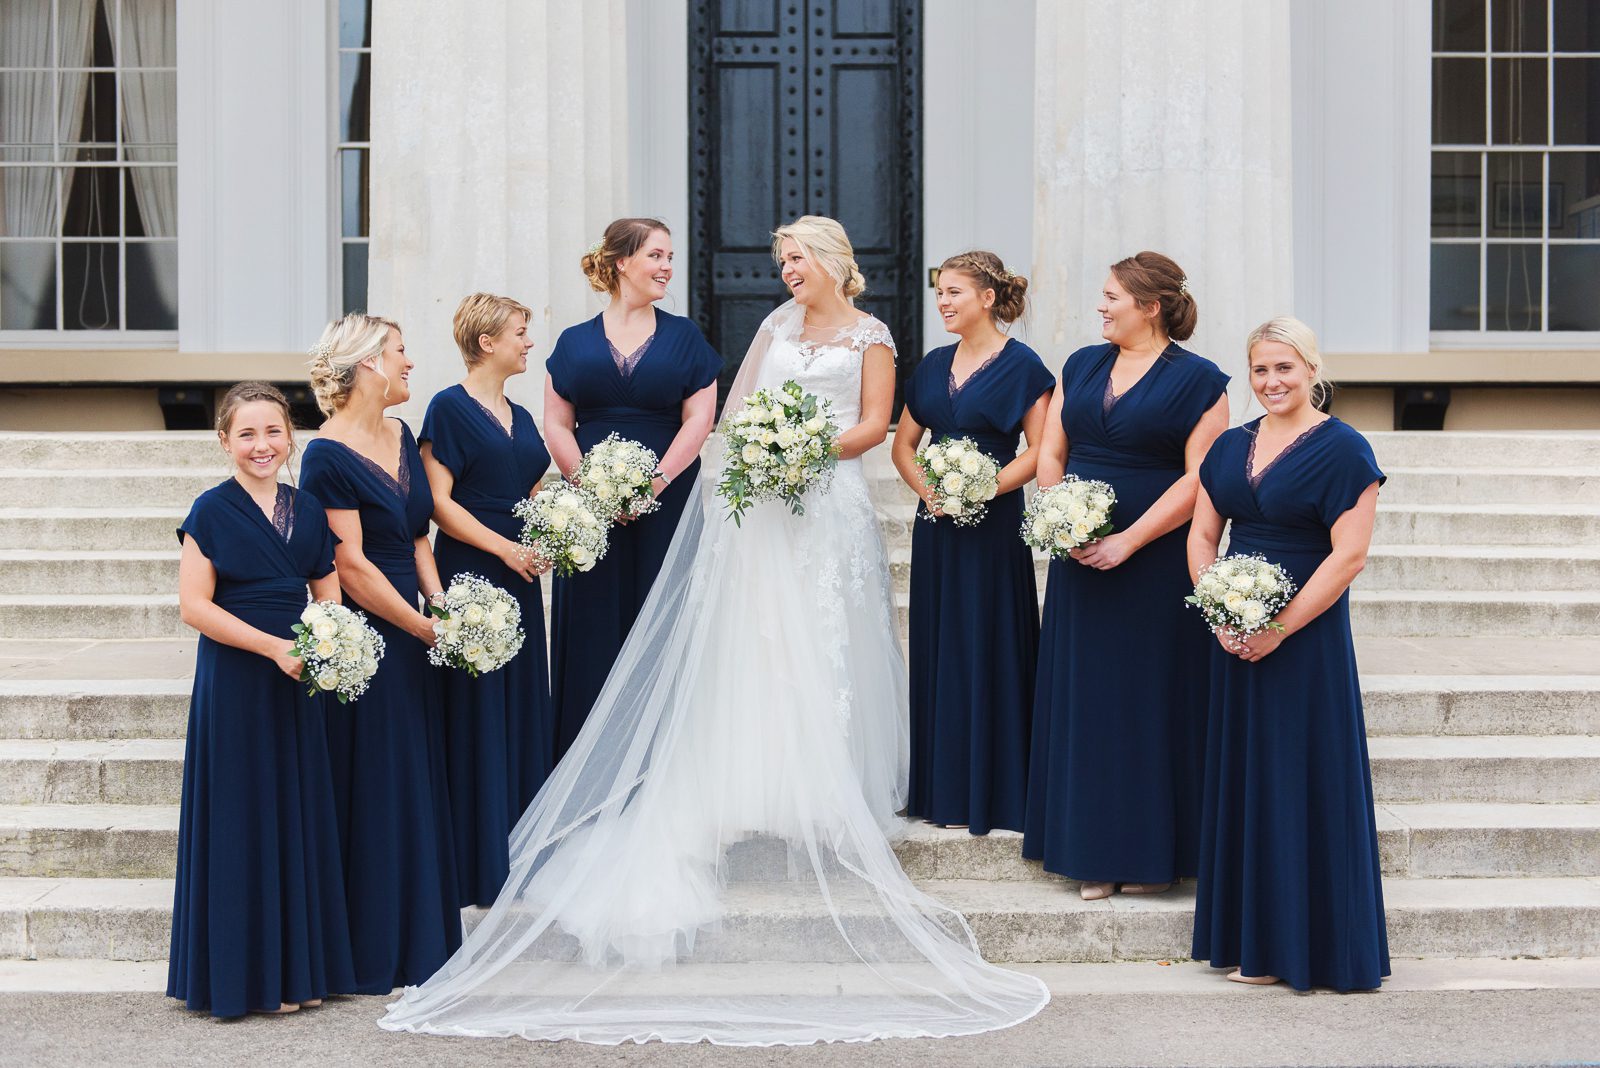 The bride and her bridesmaids have a photograph taken together on the steps of the staff college at the Royal Military Academy Sandhurst during a September wedding.